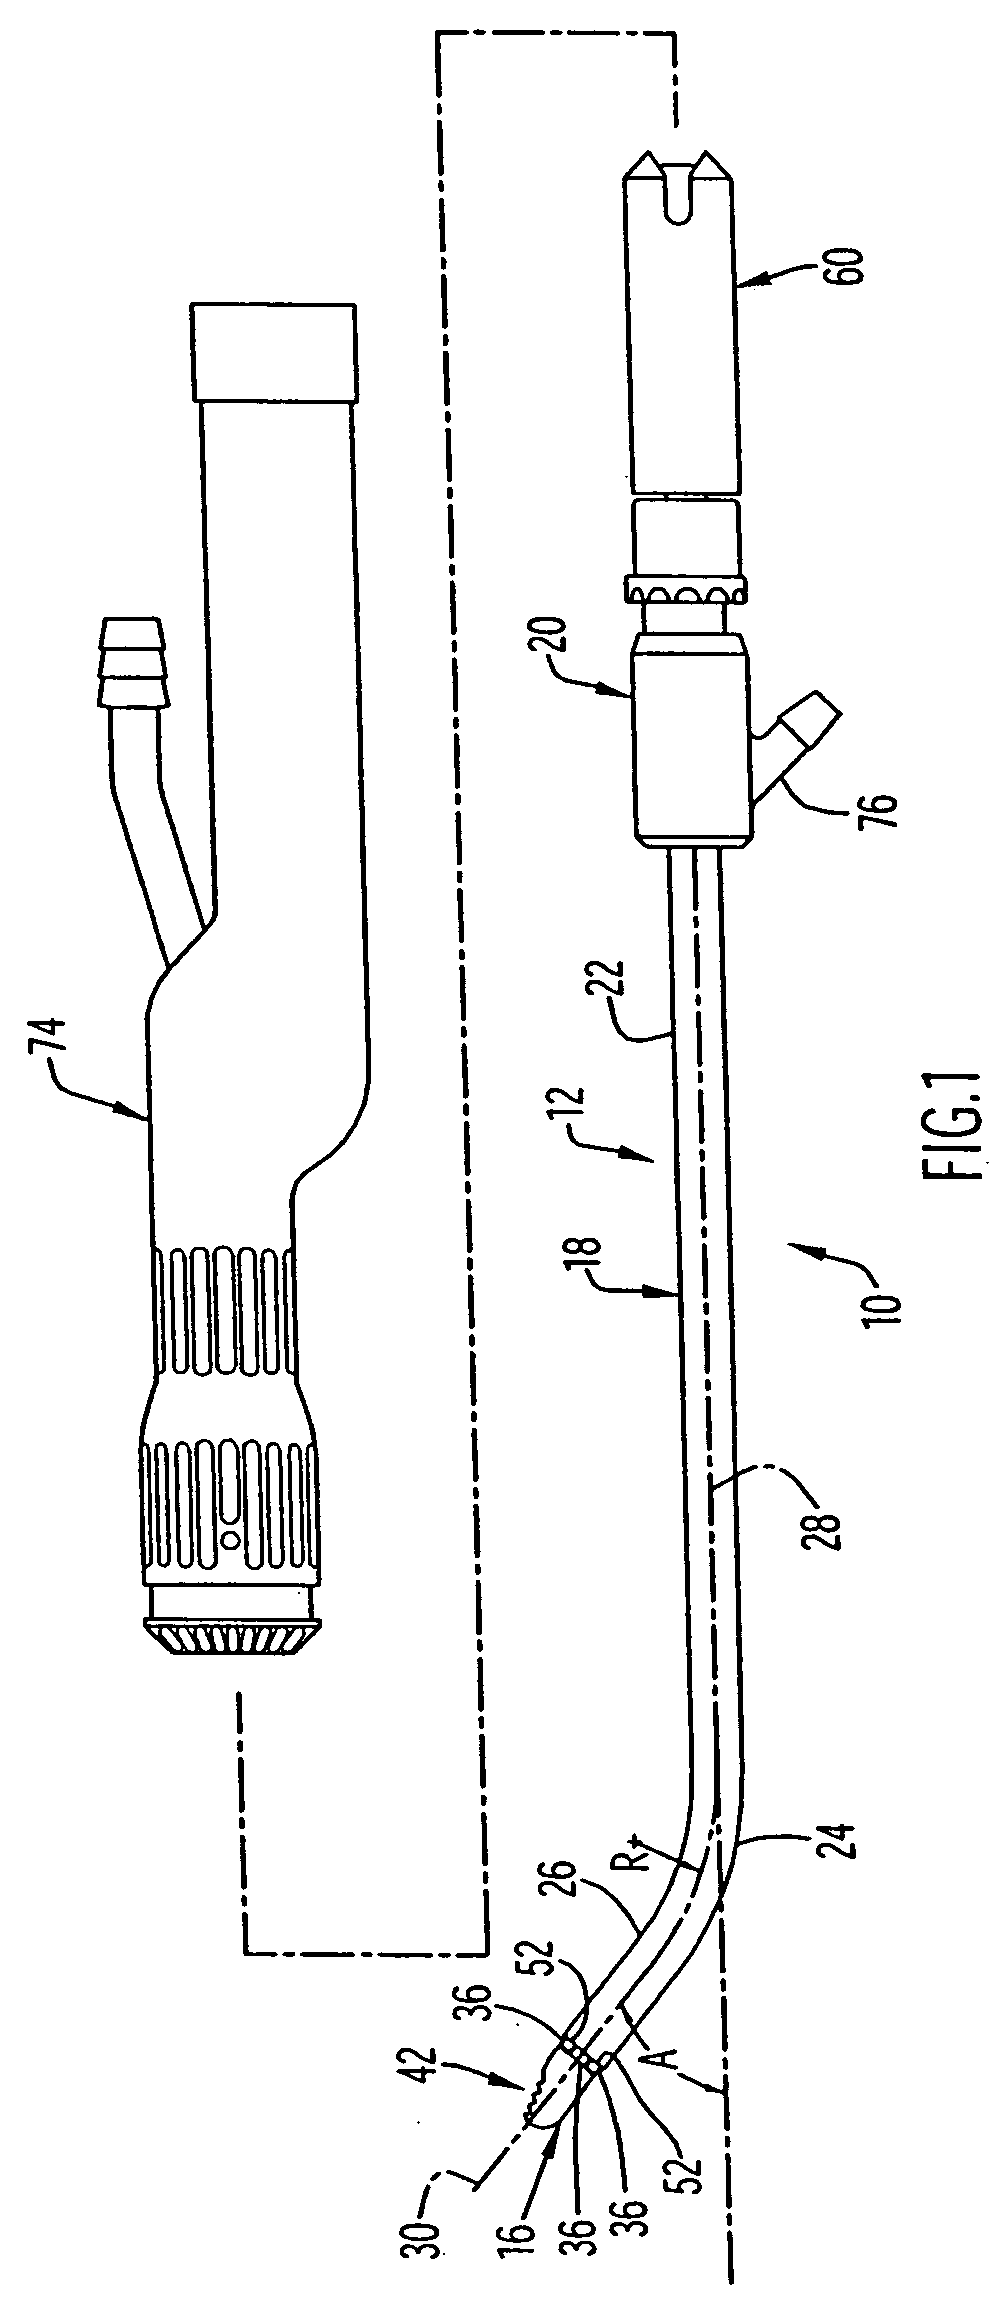 Angled tissue cutting instrument having variably positionable cutting window, indexing tool for use therewith and method of variably positioning a cutting window of an angled tissue cutting instrument